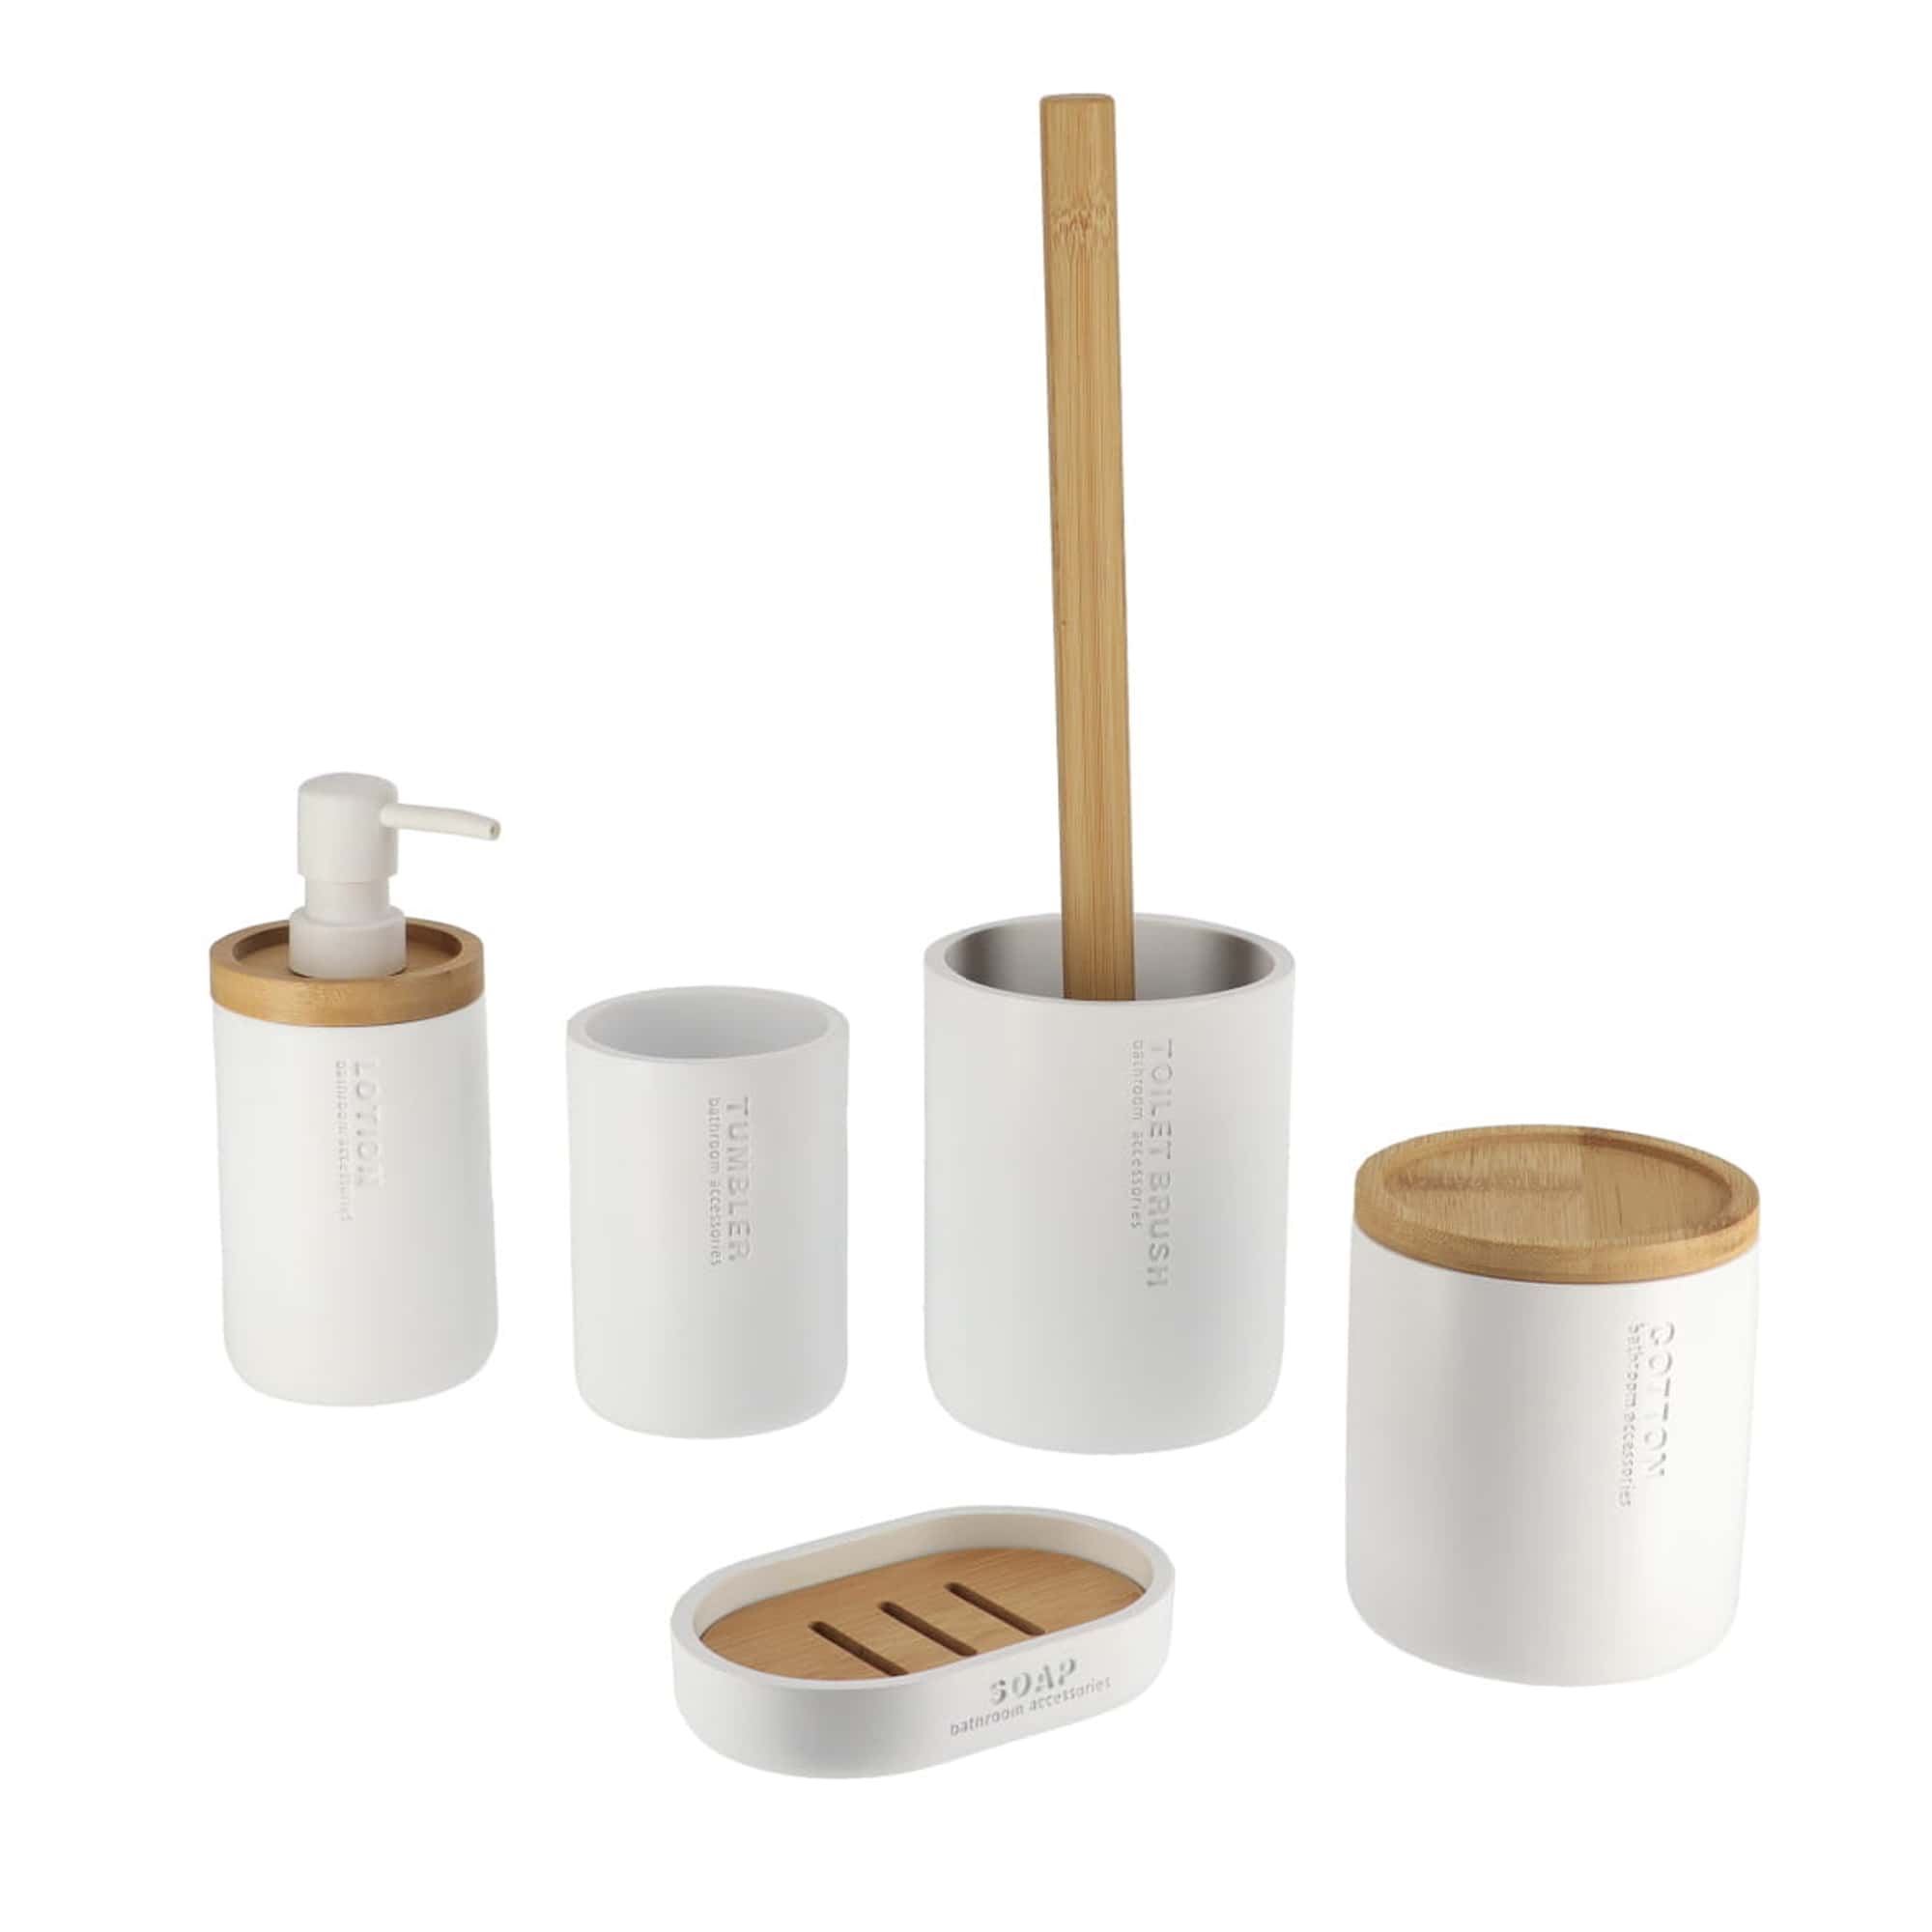 Elegant White Bathroom Accessory Kit with Bamboo Highlights 5 pieces Hand Soap Dispenser, Tumbler Cup, Toilet Brush Set, Cotton Box and Soap Tray